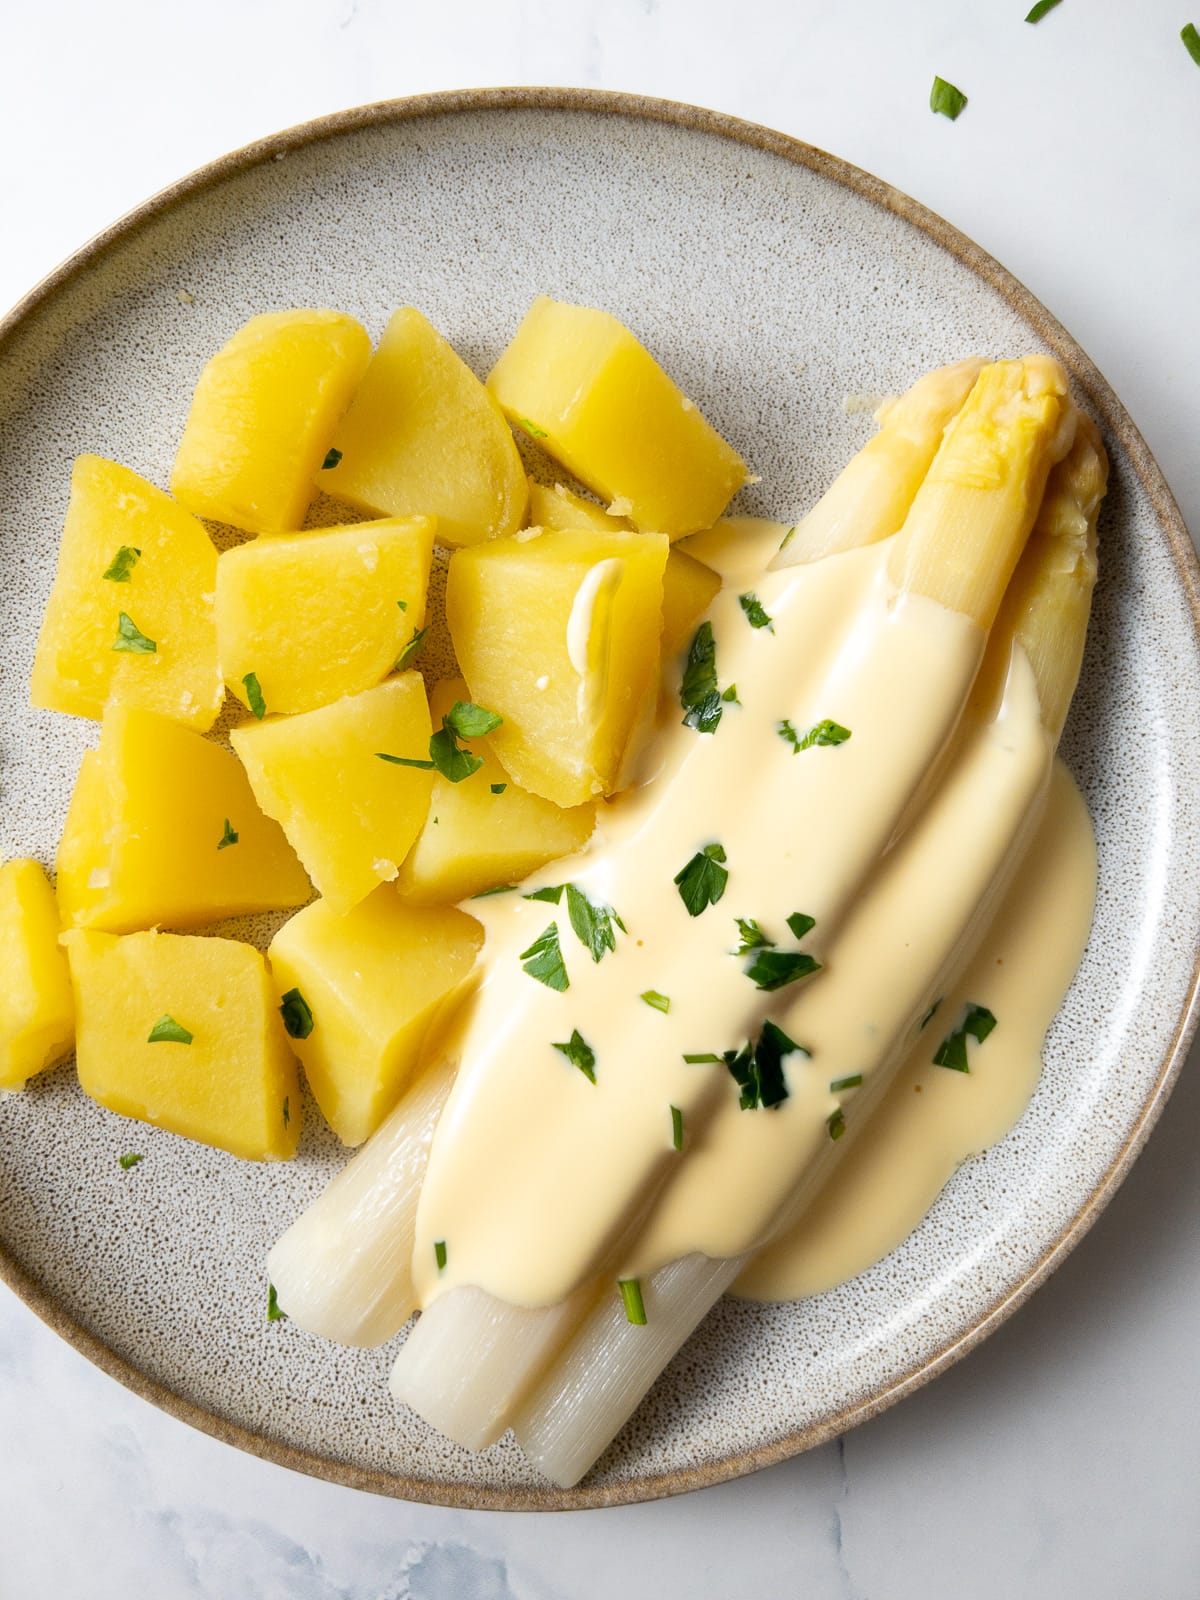 white asparagus with cooked potatoes and hollandaise sauce garnished with parsley on a plate